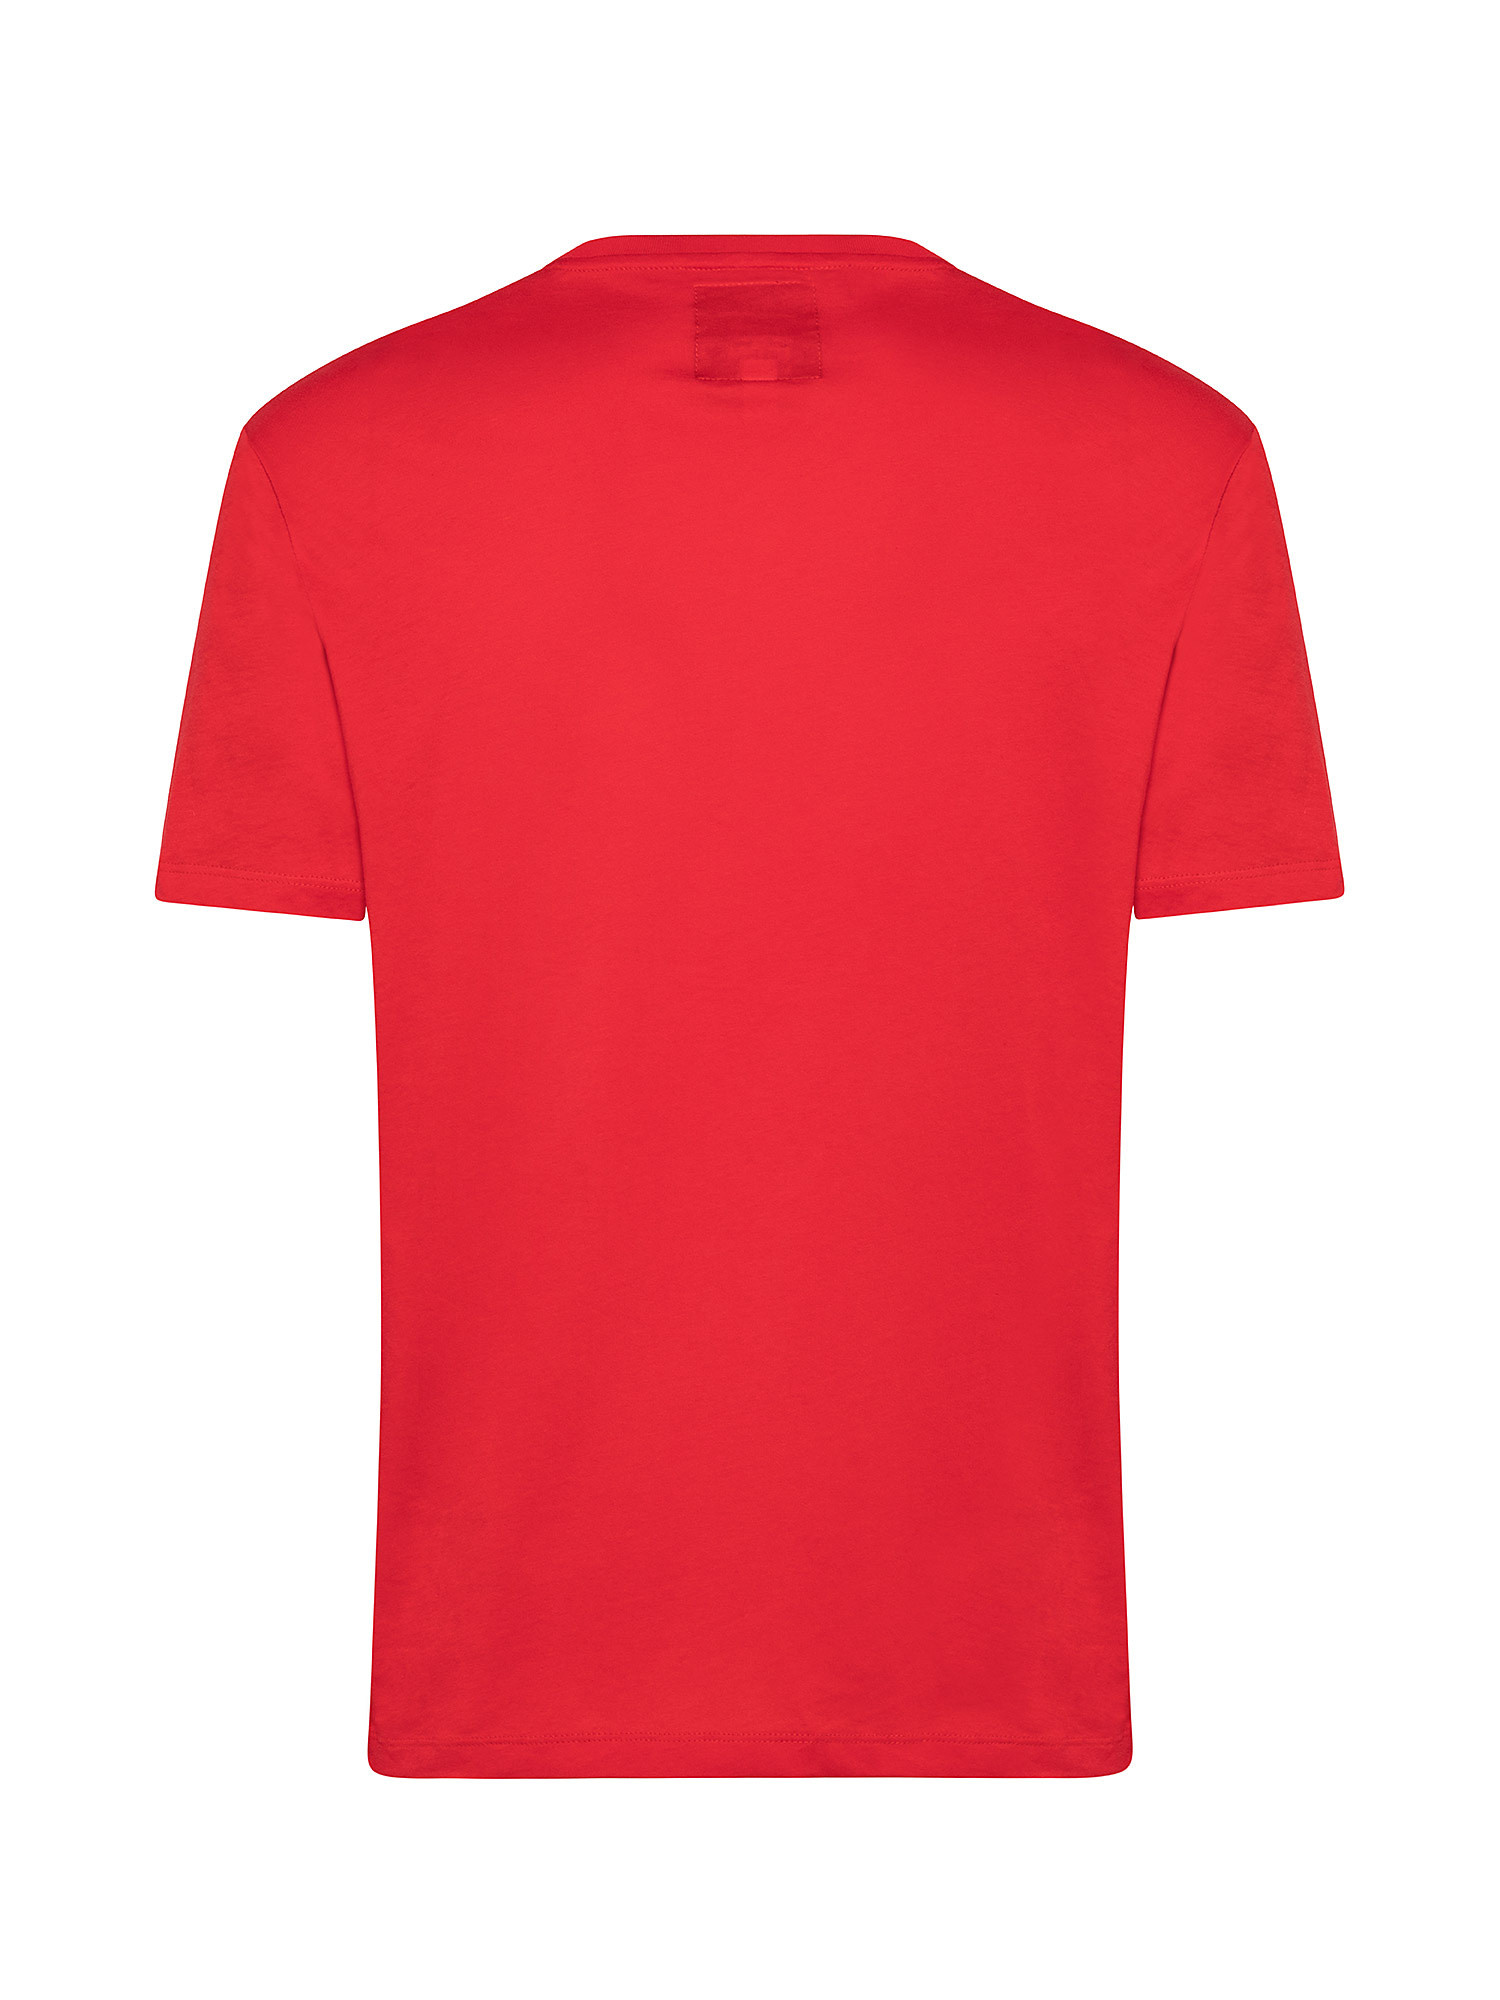 T-Shirt, Rosso, large